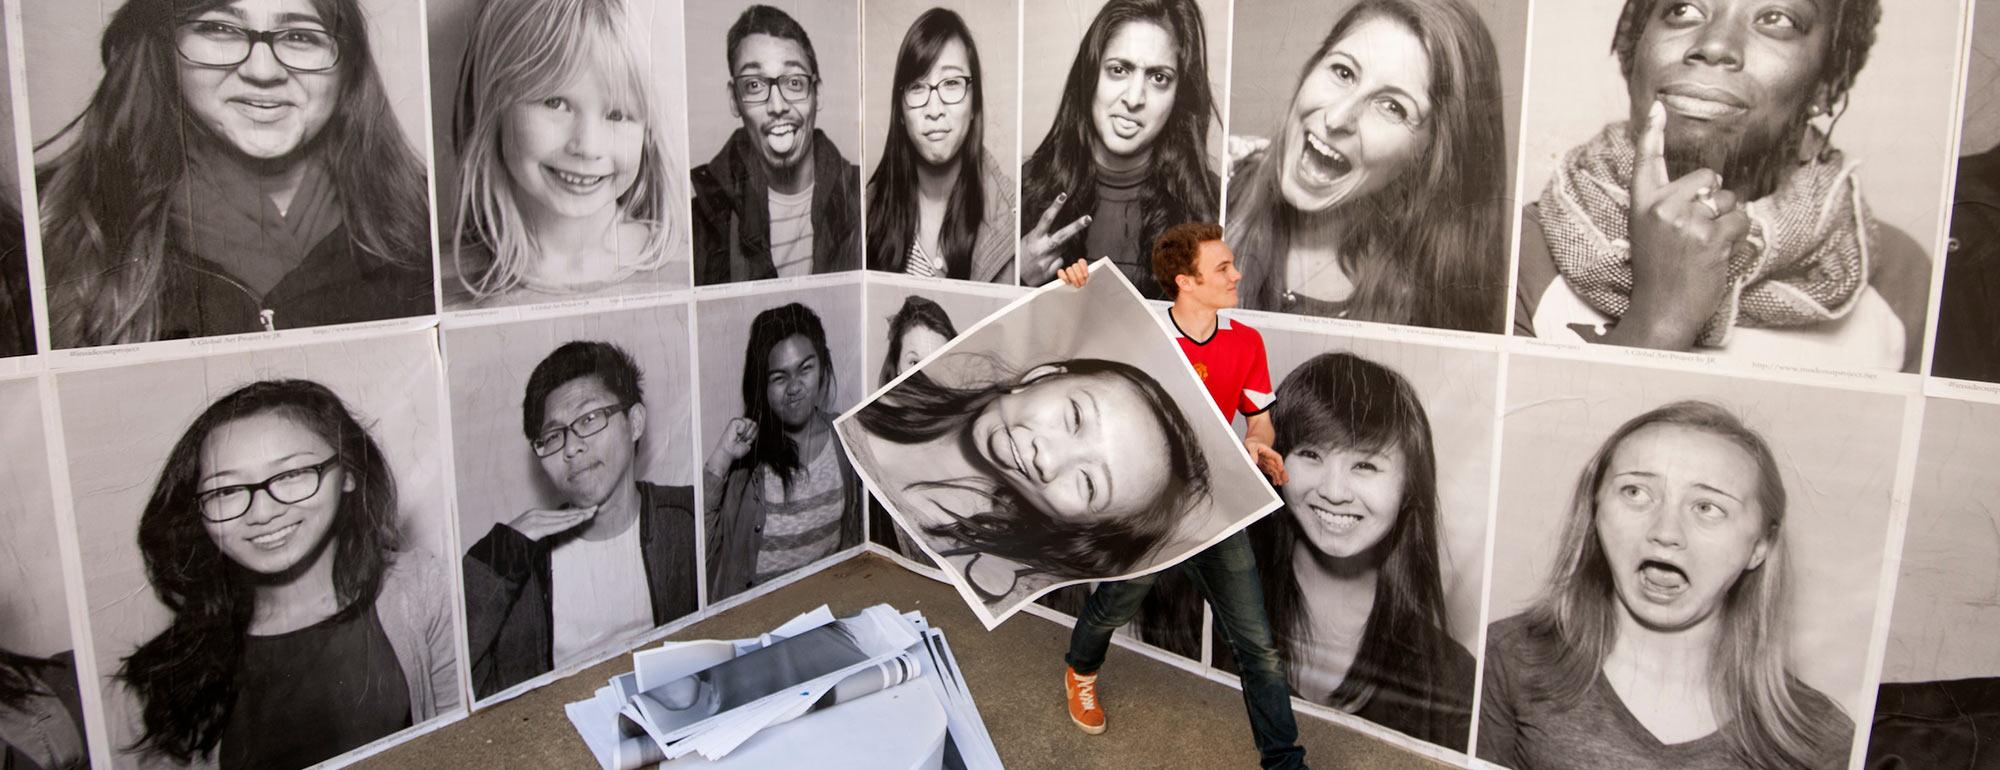 A student wall papers the Social Sciences building with artful portrait photographs